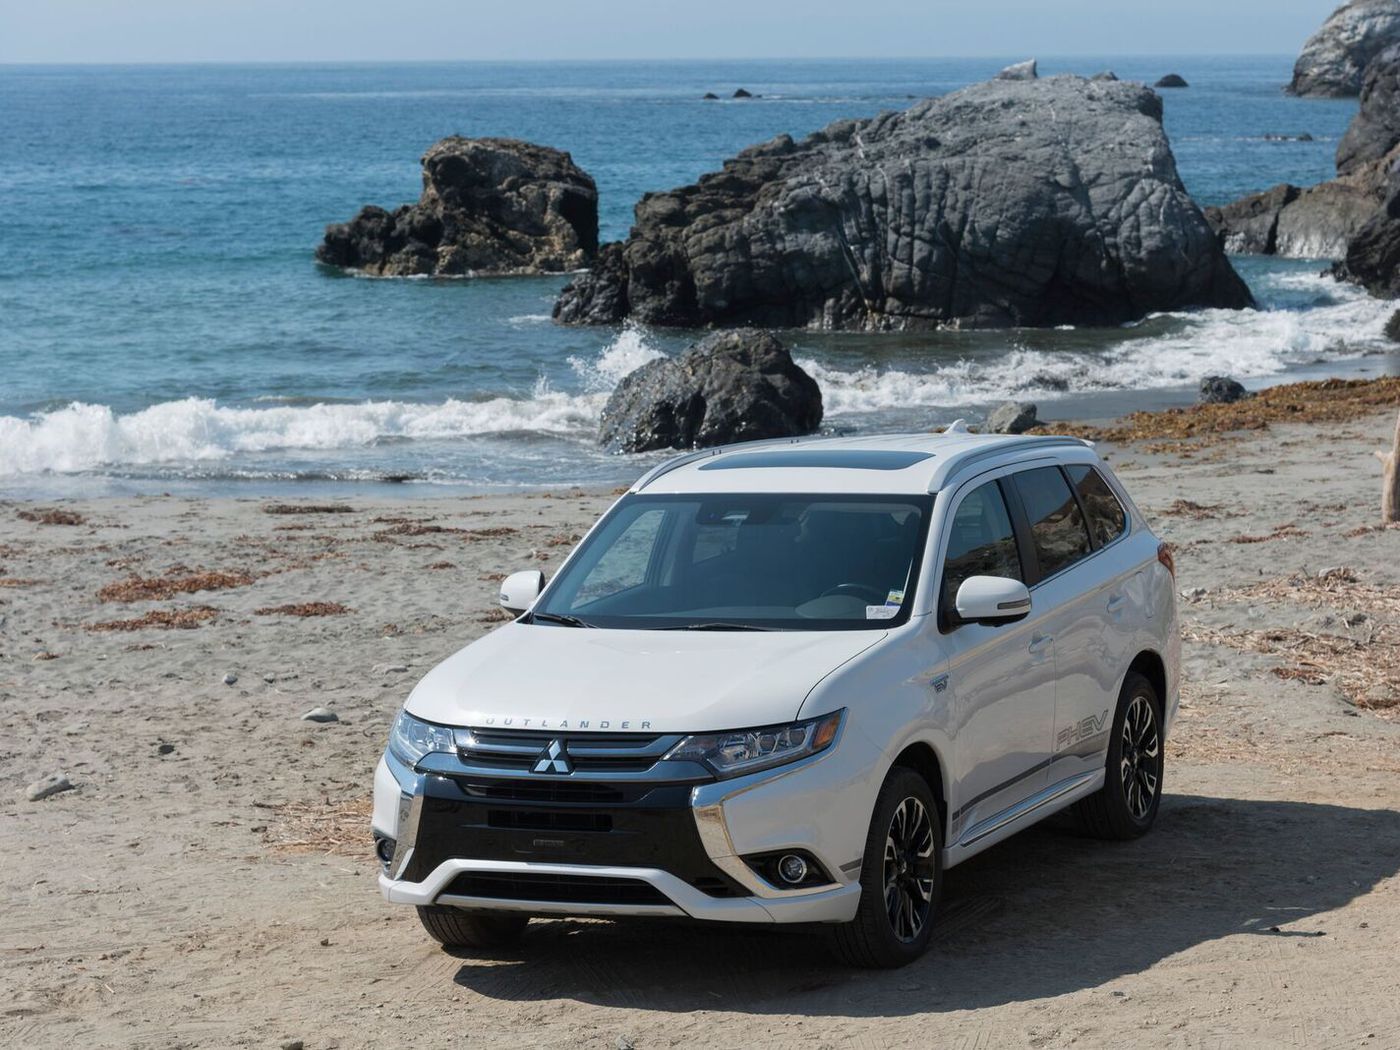 2018 Mitsubishi Outlander PHEV first drive: winner by default - The Verge